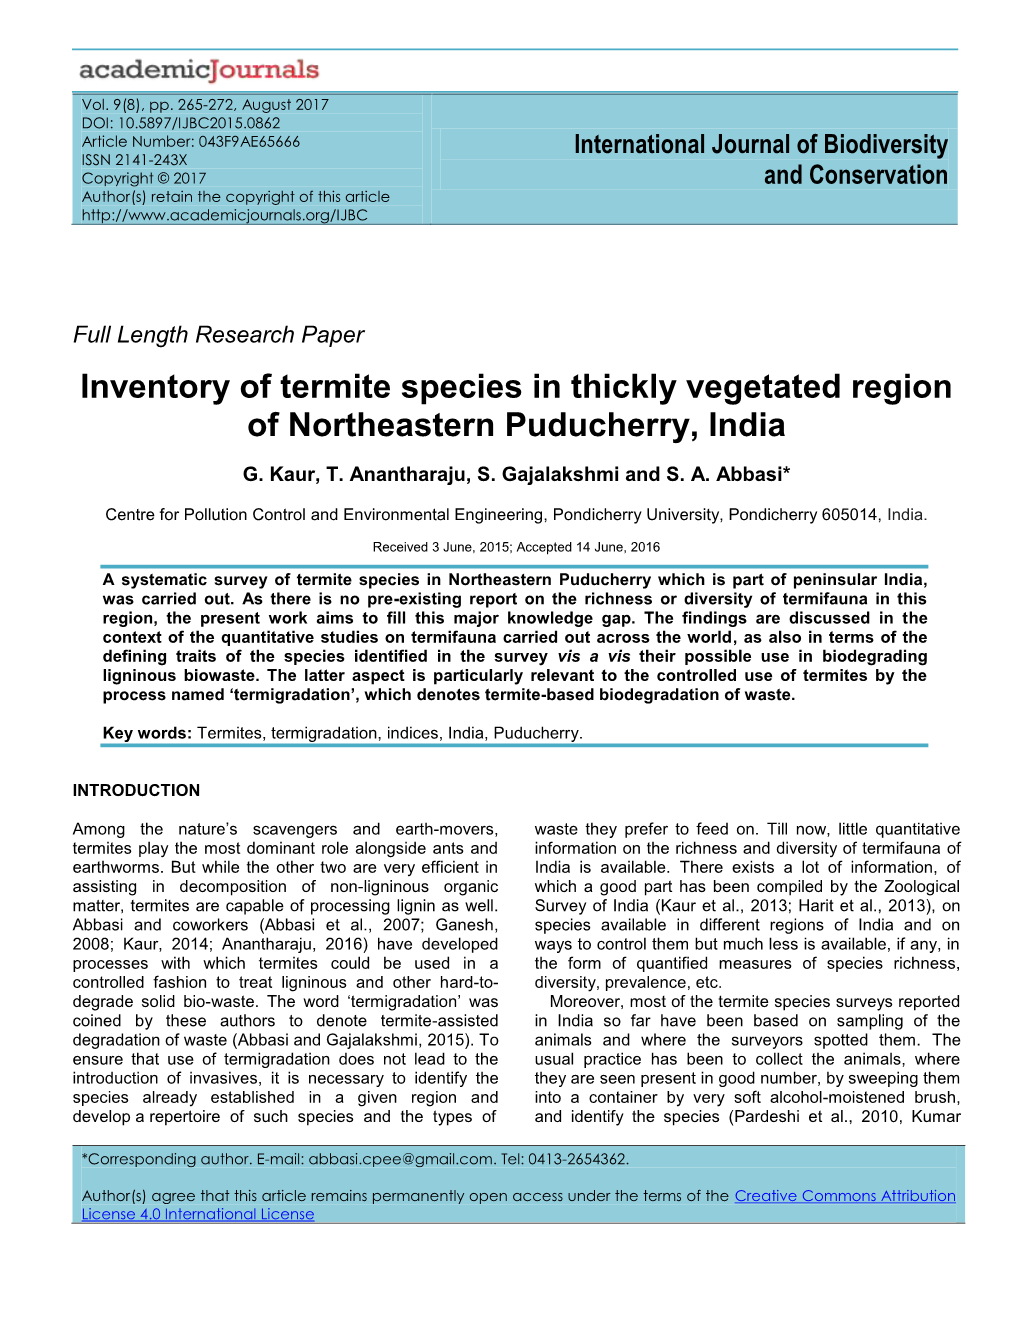 Inventory of Termite Species in Thickly Vegetated Region of Northeastern Puducherry, India